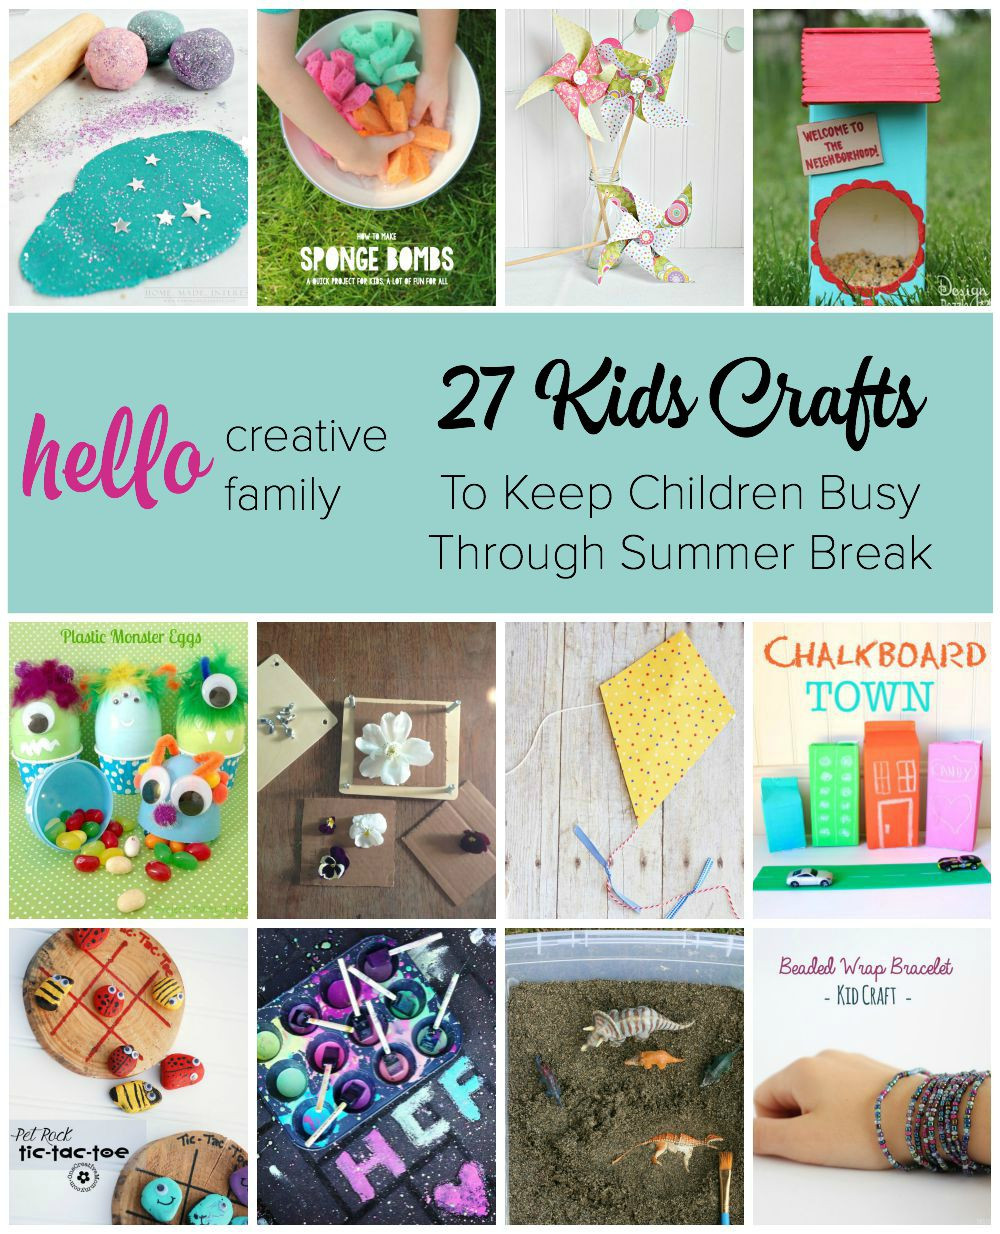 Creative Project For Kids
 27 Kids Crafts and DIY Projects For Summer